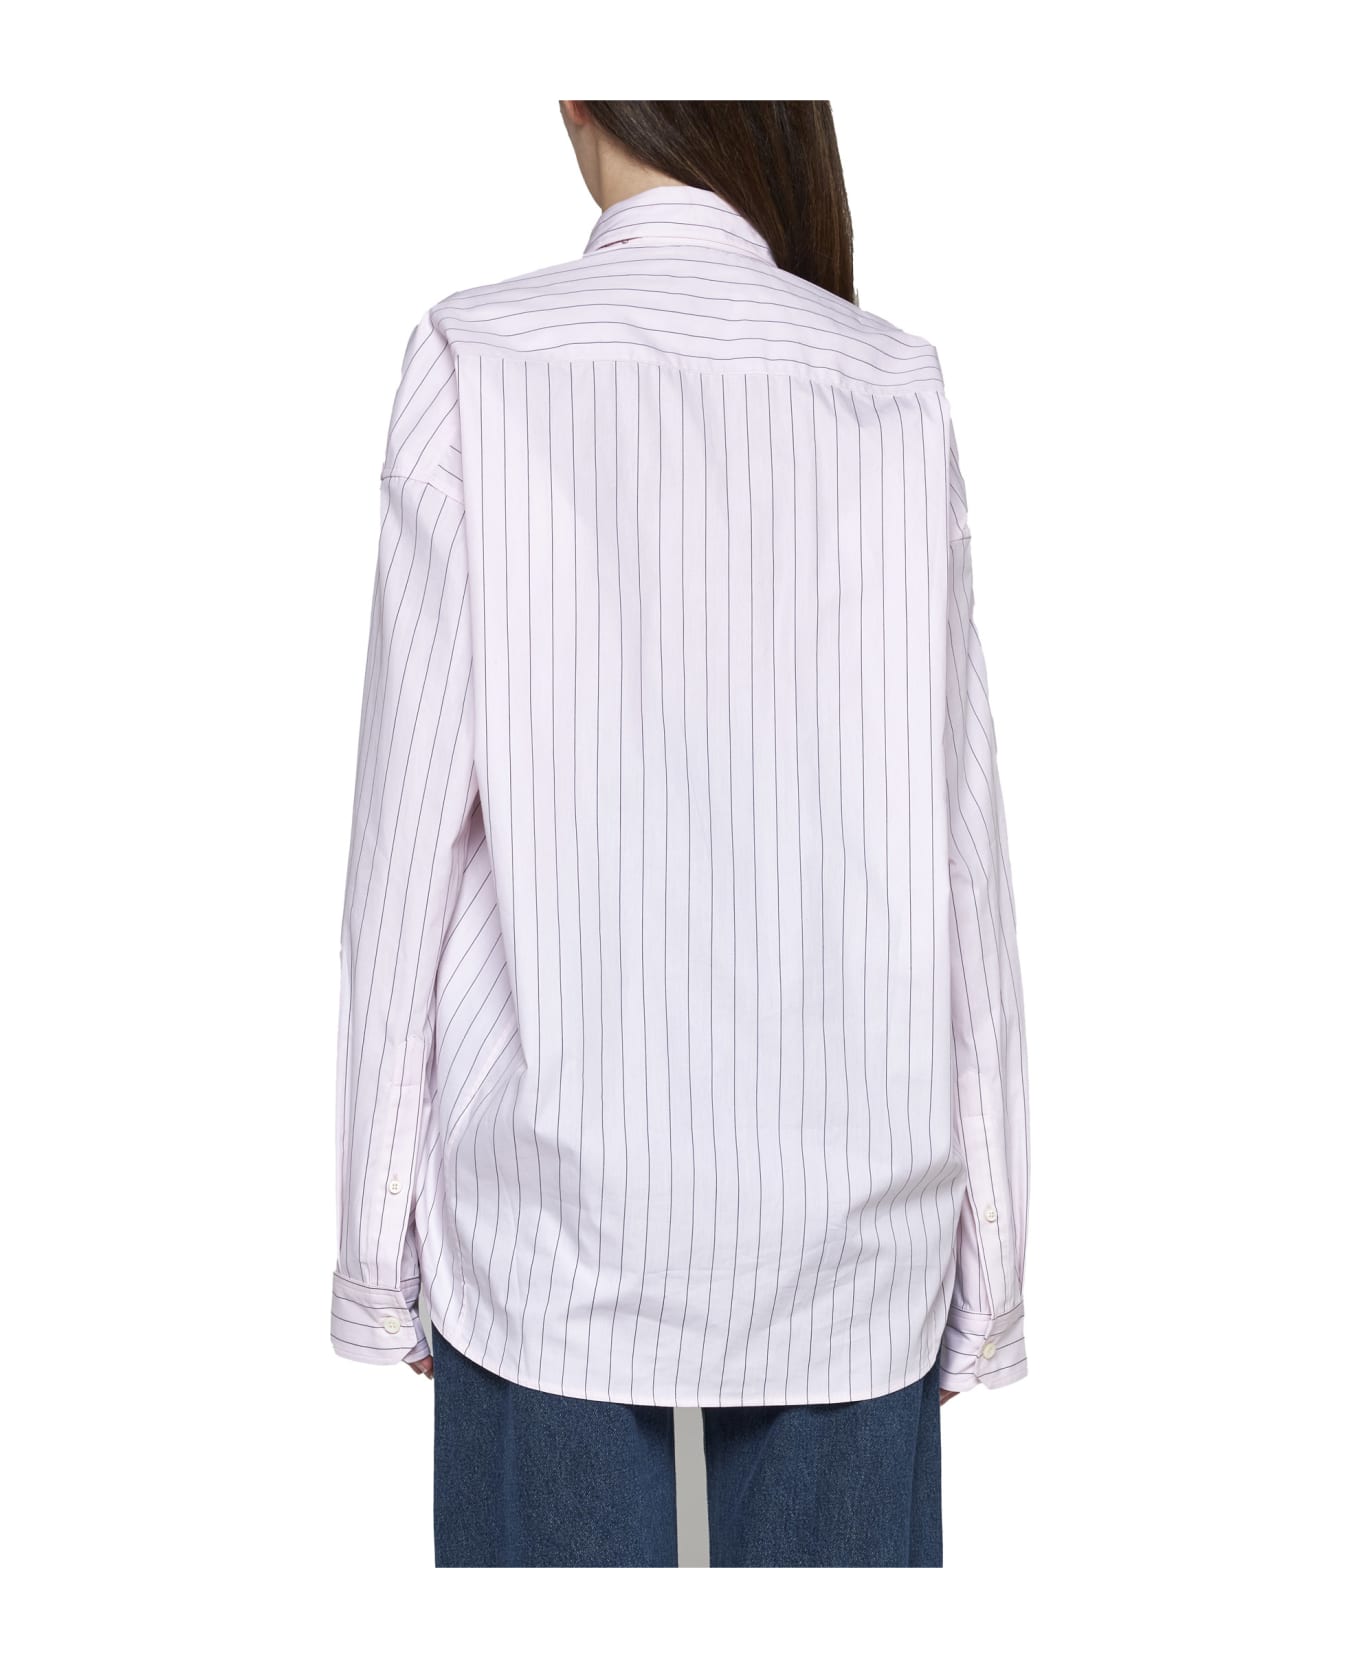 Y/Project Shirt - Pink stripe